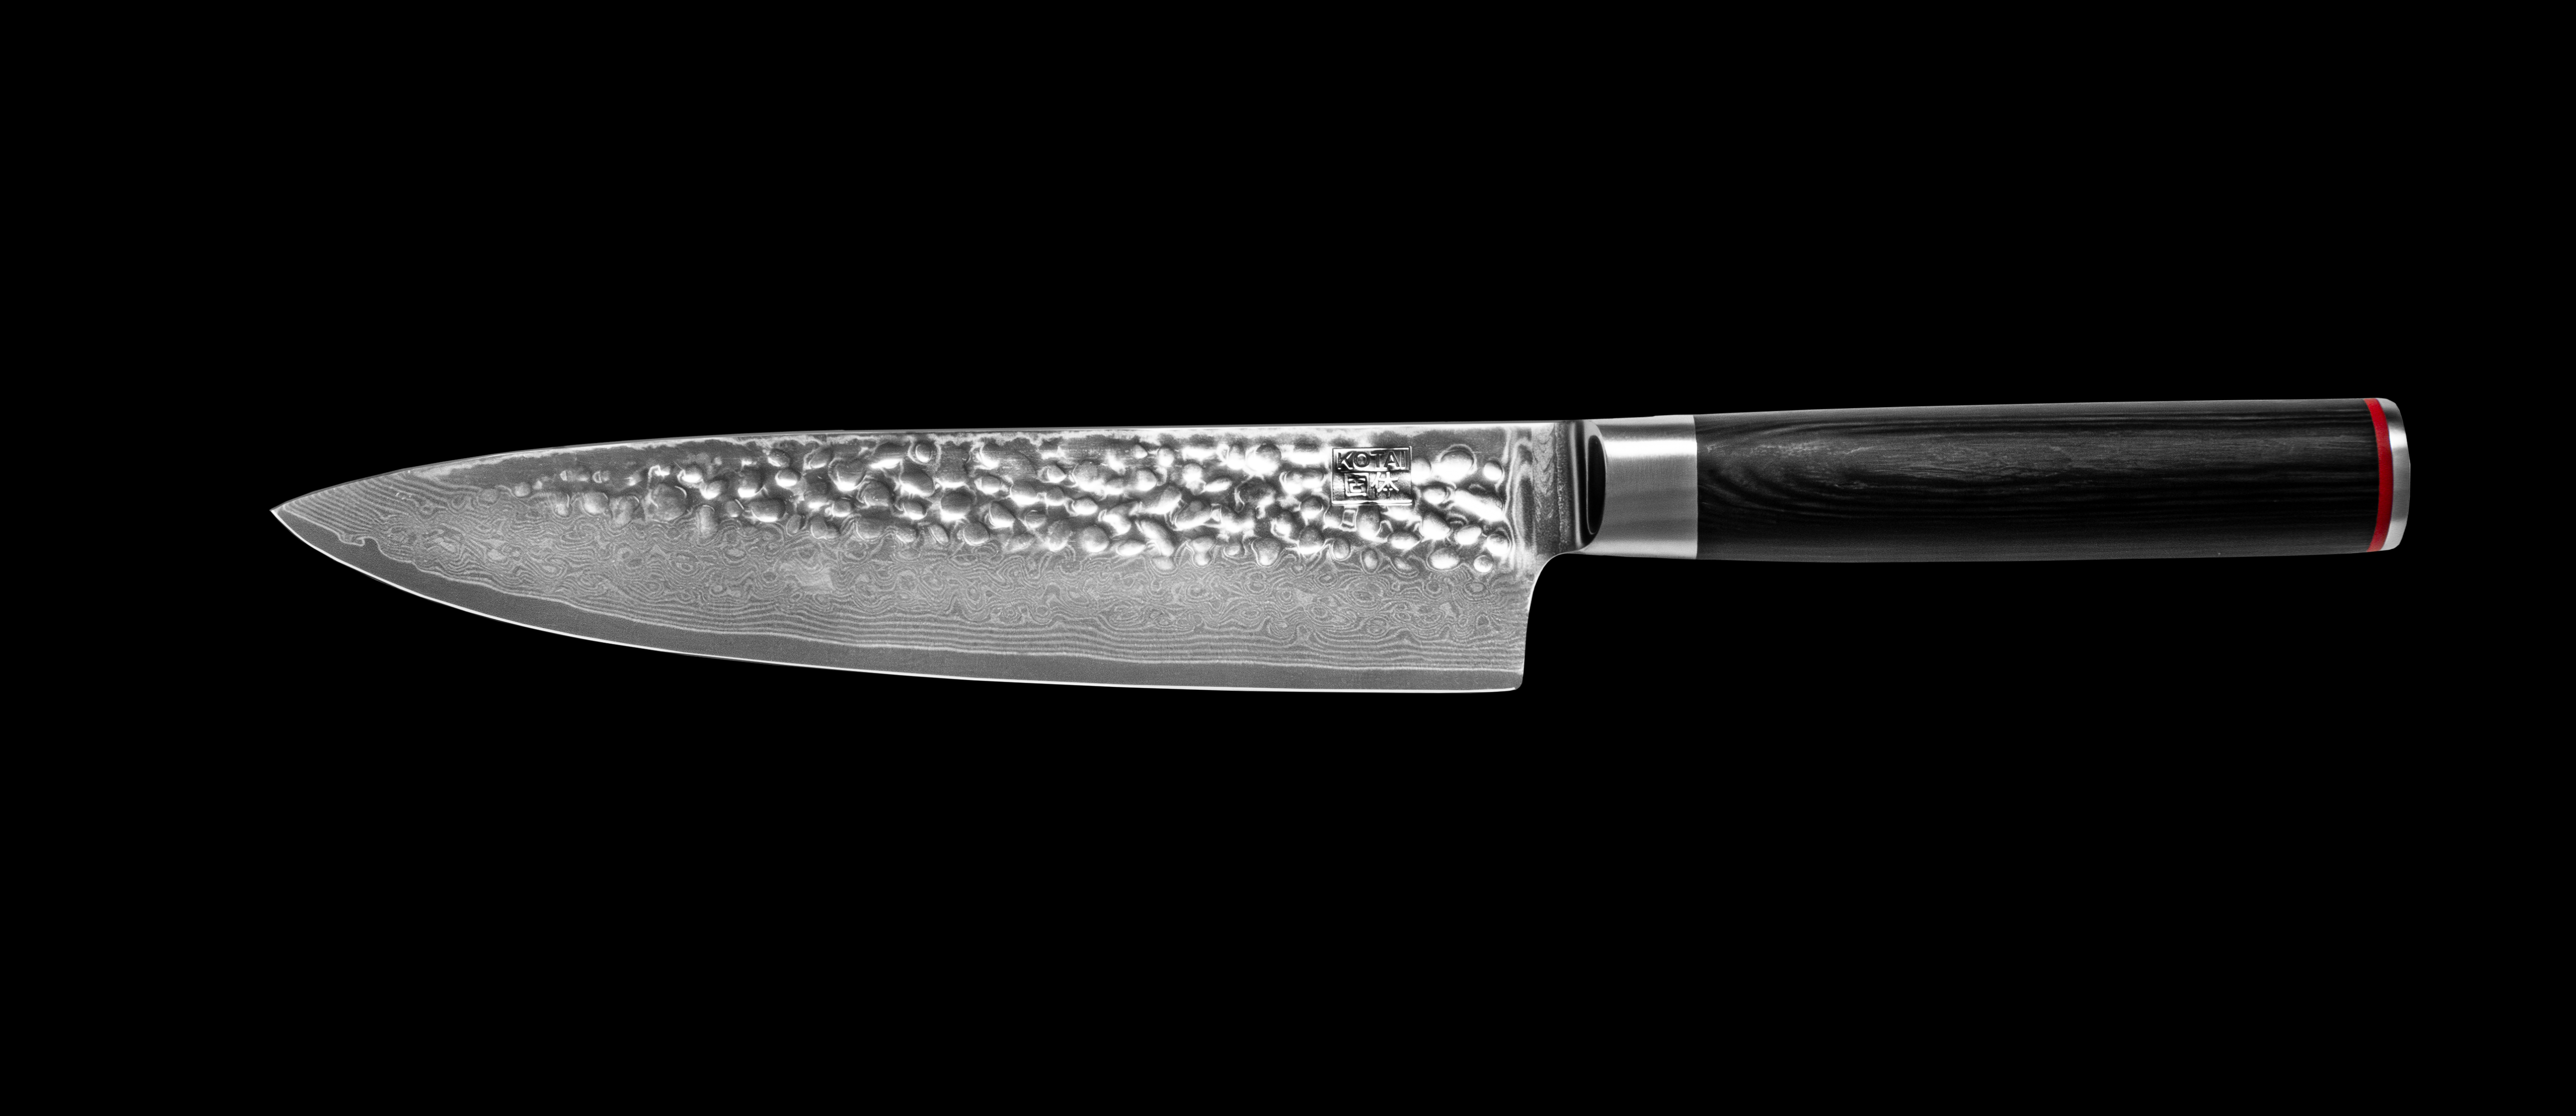 KOTAI's Gyuto also known as Chef's knife in Damascus steel, displayed on a black background. 